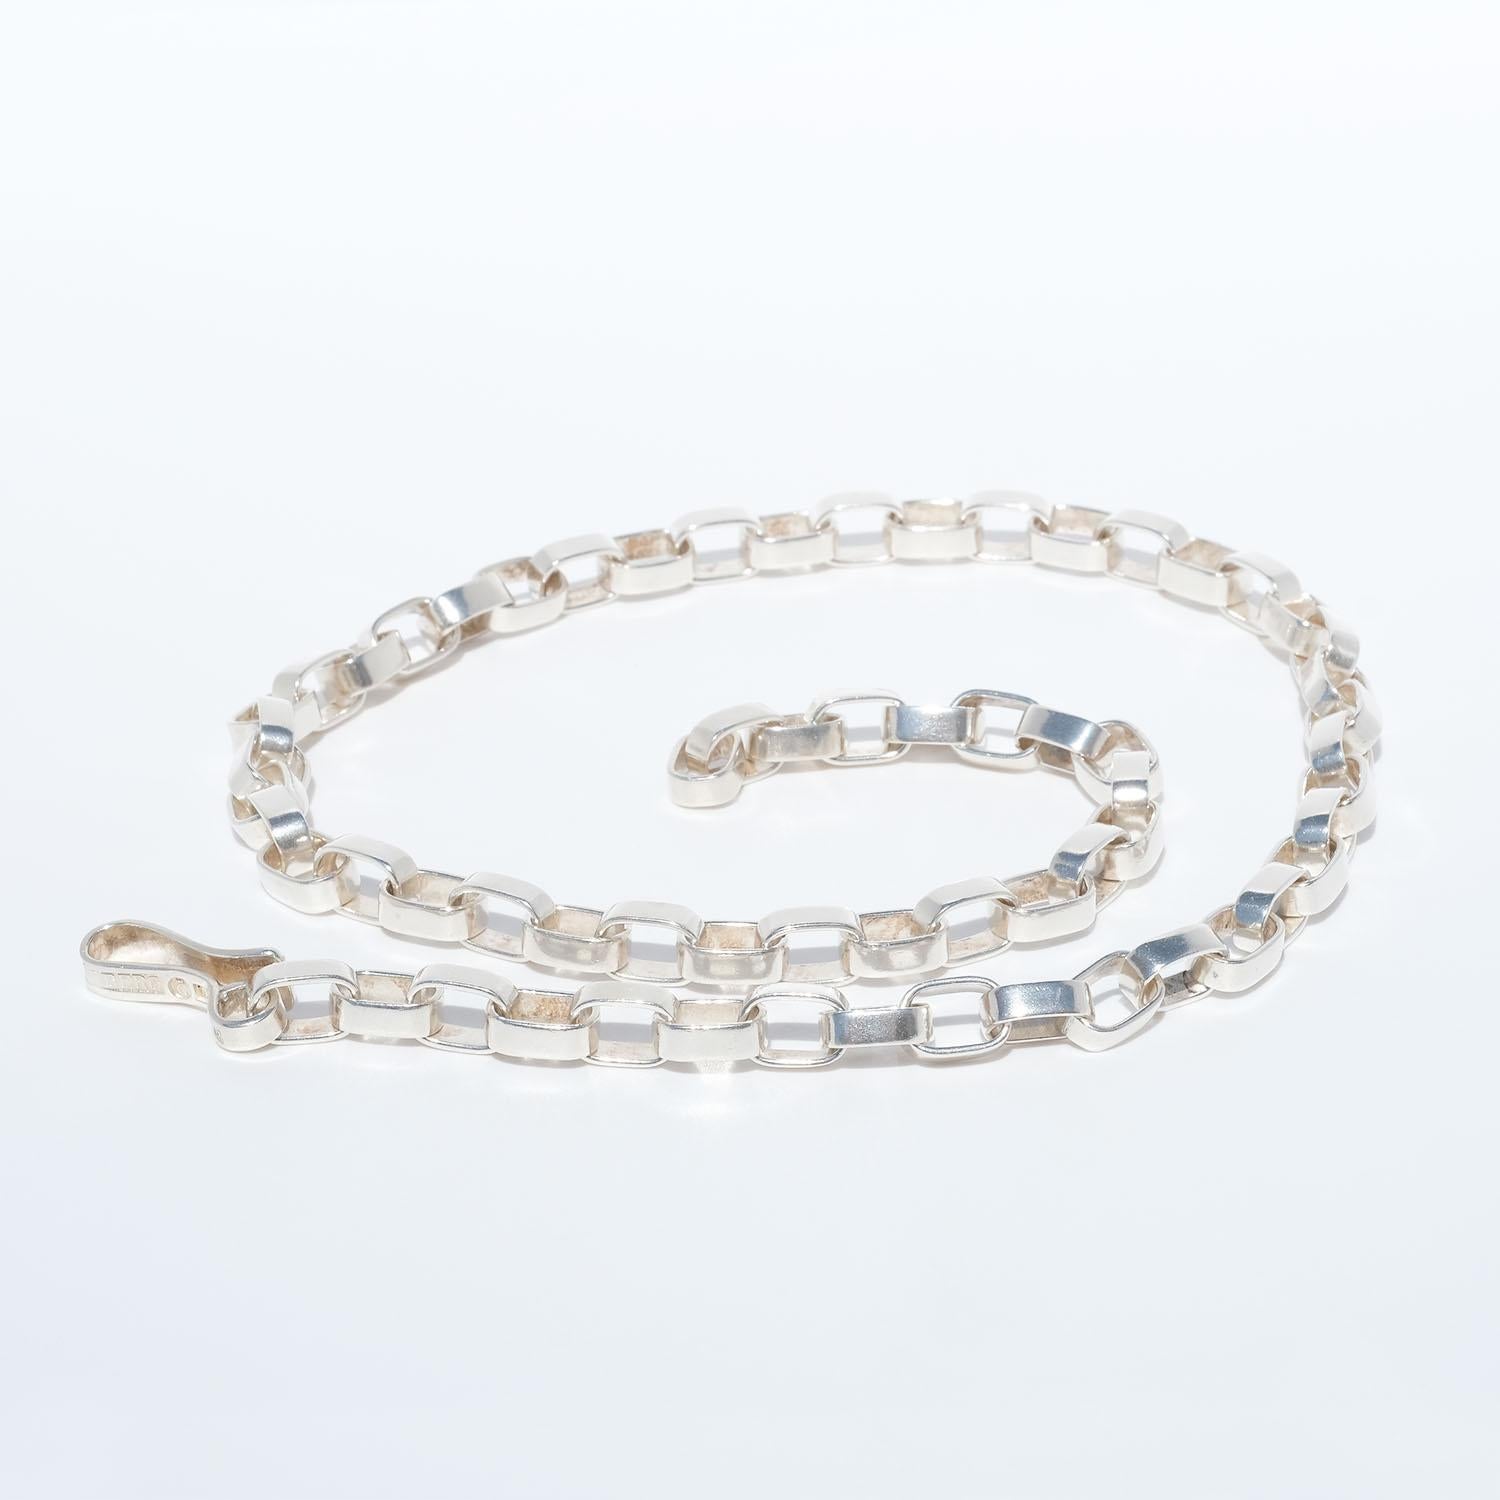 This sterling silver anchor chain necklace is made of silver rectangular links which are linked together. The links have a glossy surface and the necklace closes easily with a large hook.

This is a necklace that you can wear with any outfit and